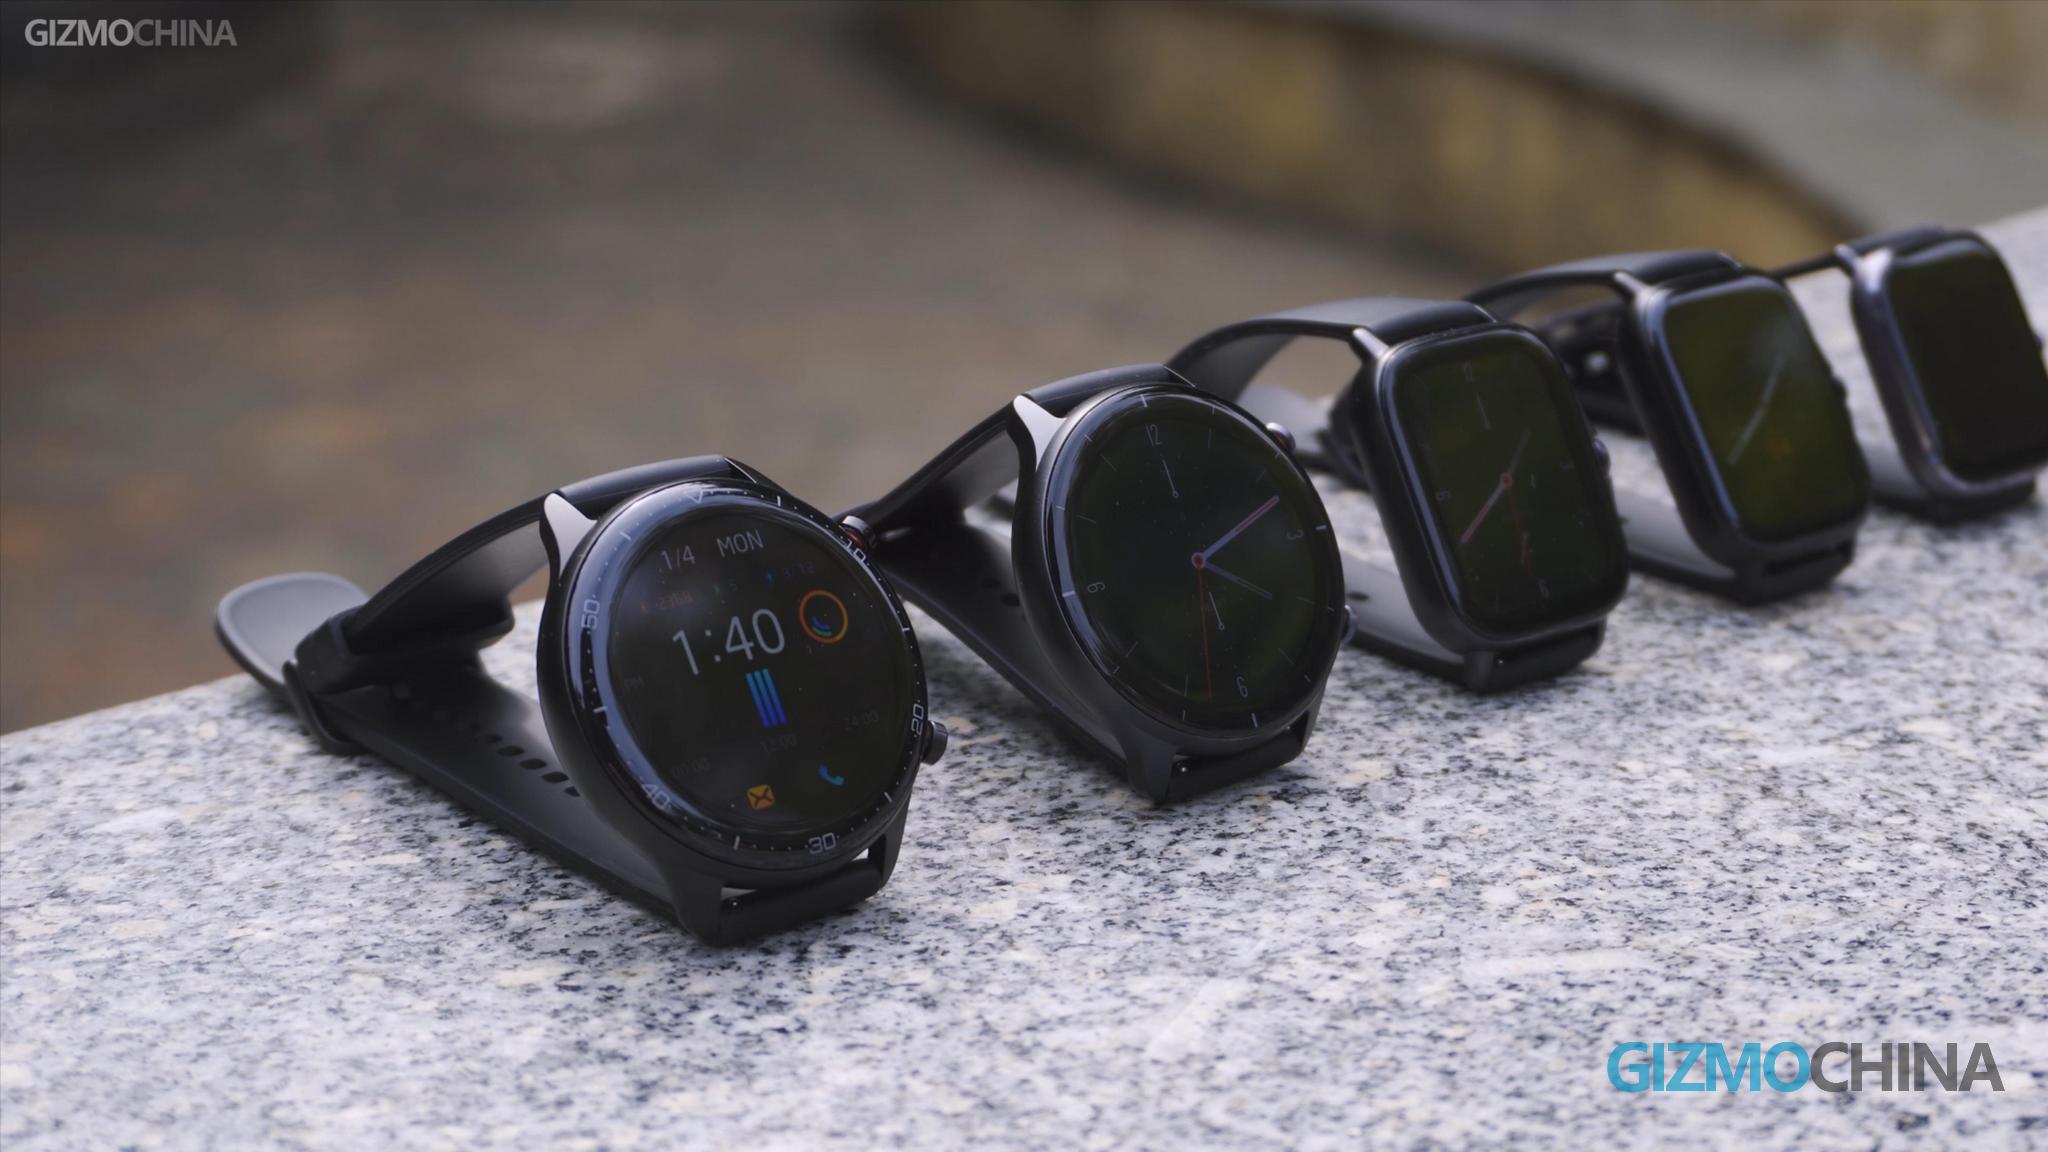 Amazfit GTR 2 (2022) vs Amazfit GTS 4 Mini: What is the difference?